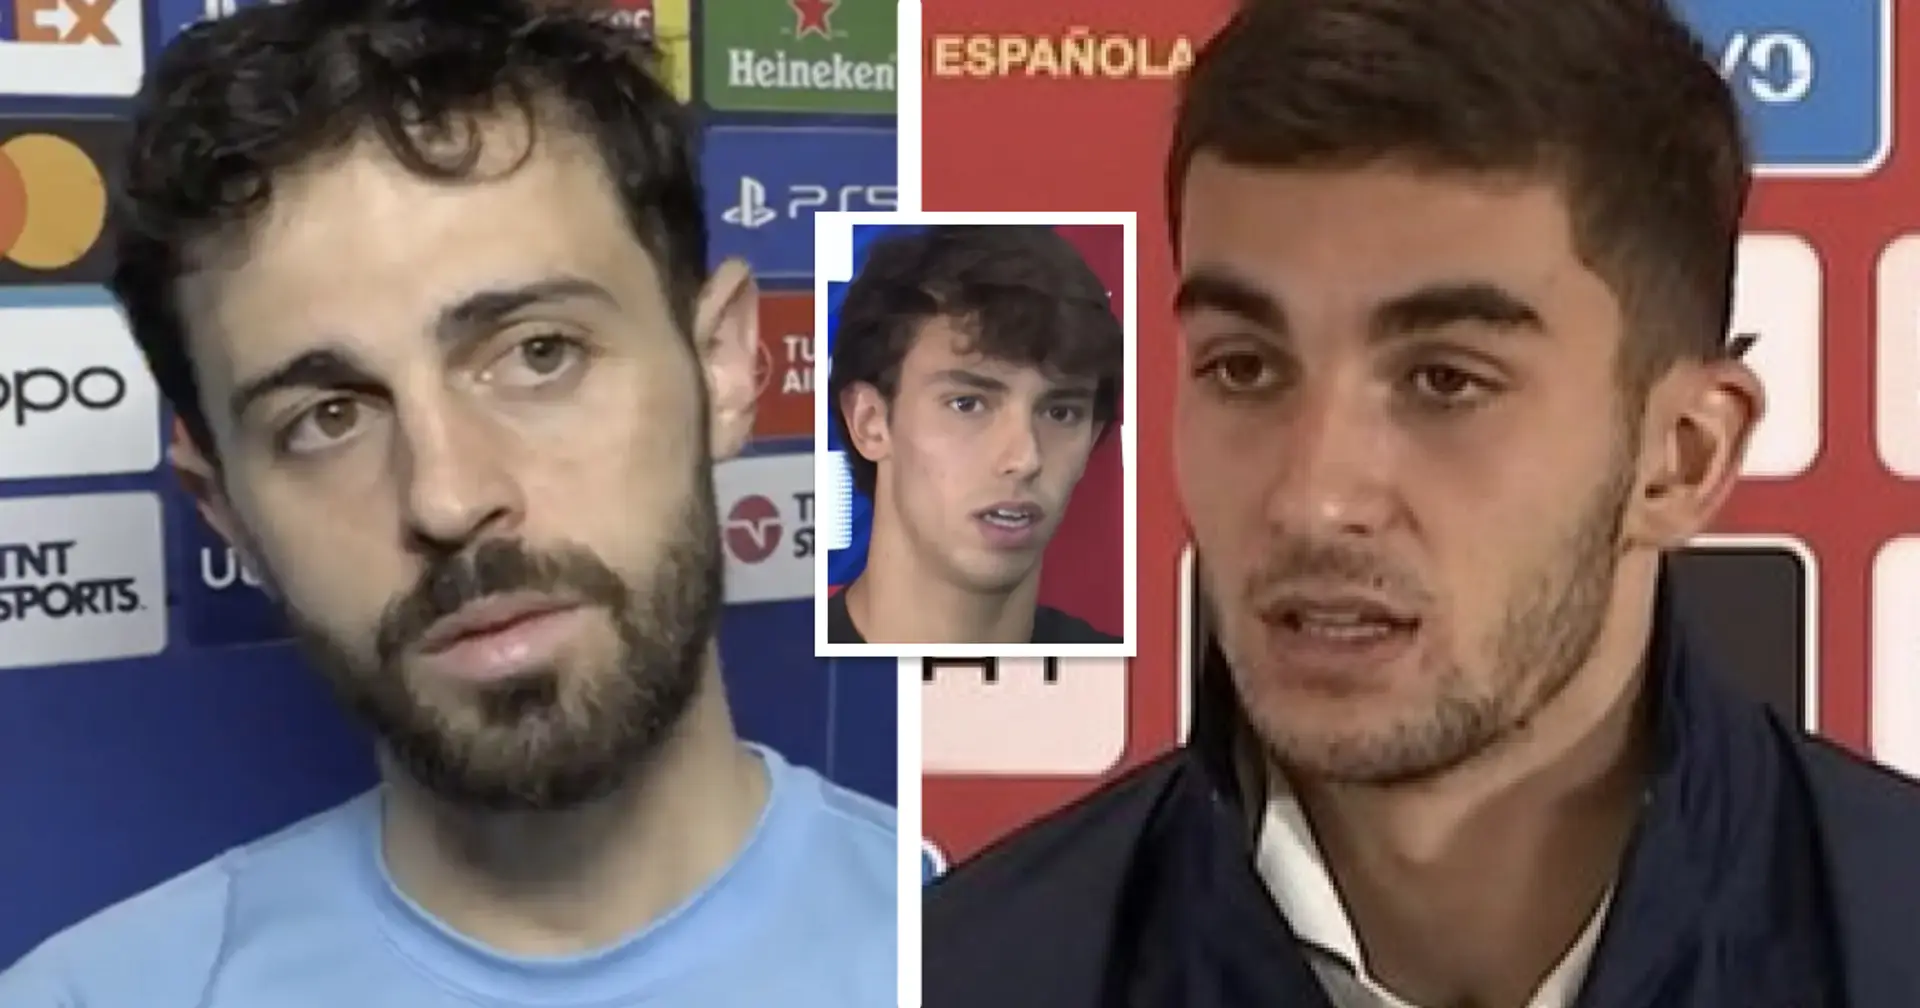 Bernardo Silva, Ferran and 8 more names in Barca's transfer round-up with probability ratings